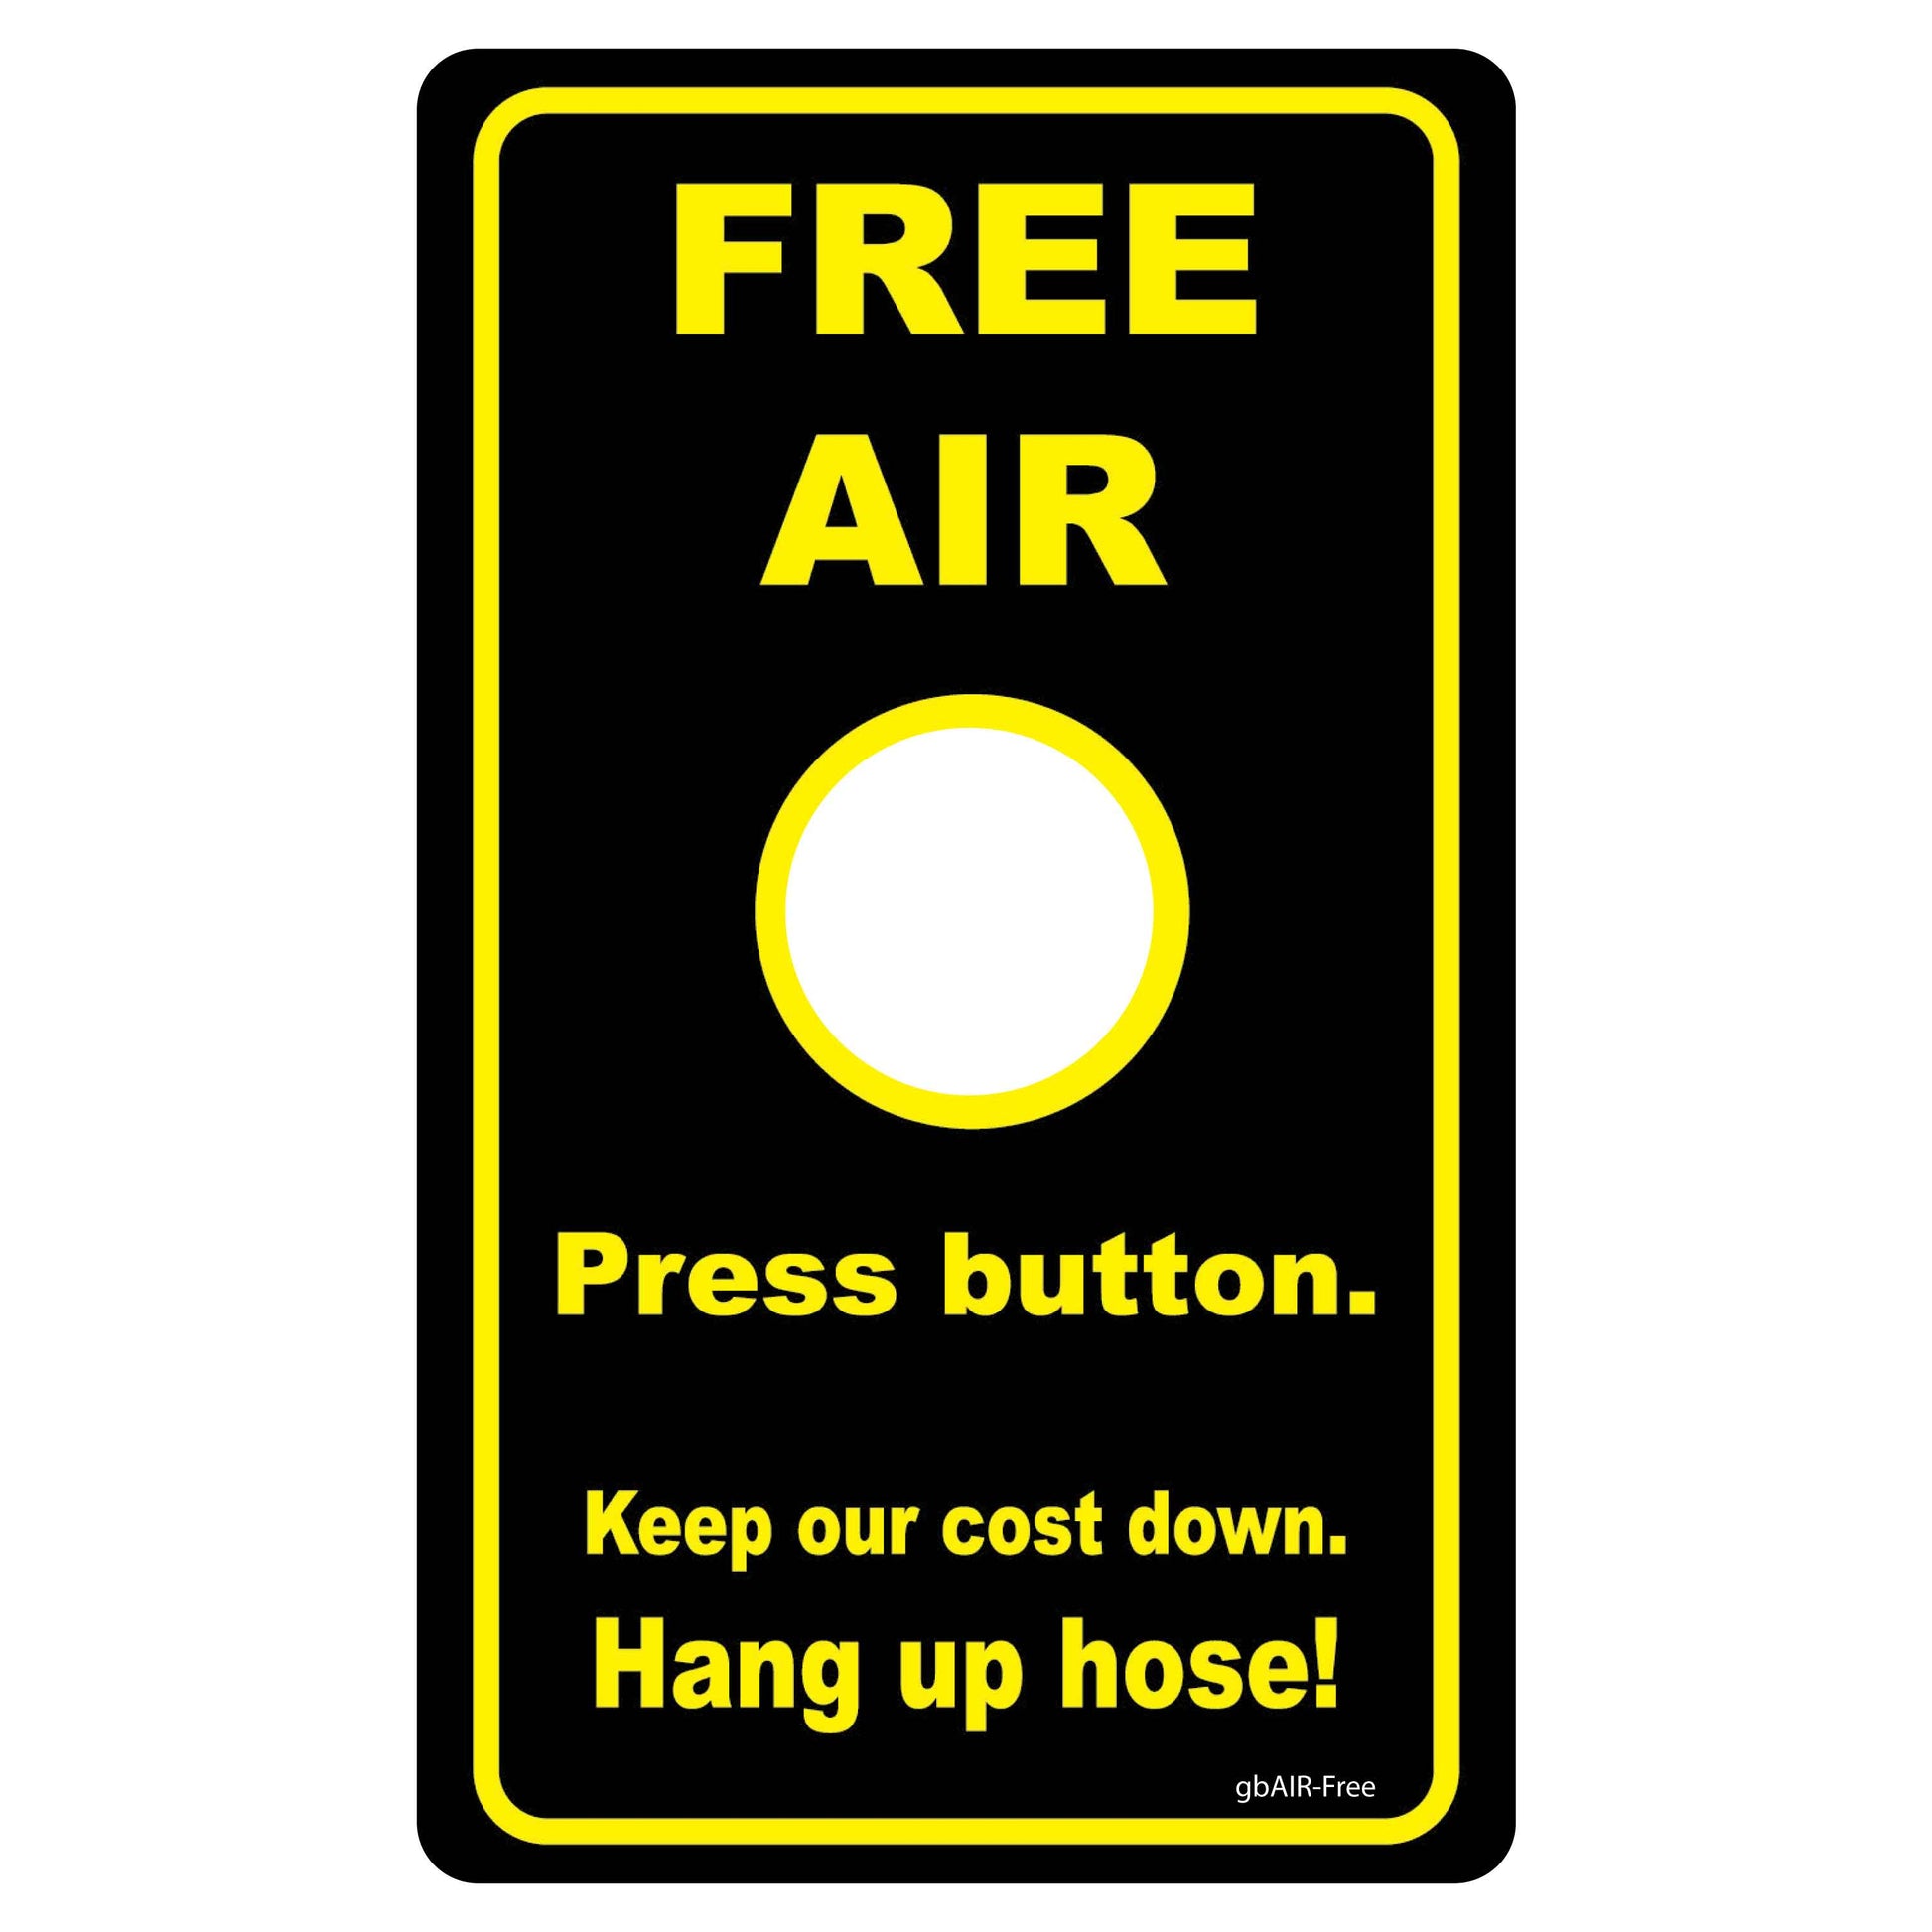 Free Air Decal. Keep our cost down, Hang up hose! 3 inches by 5 inches in size.